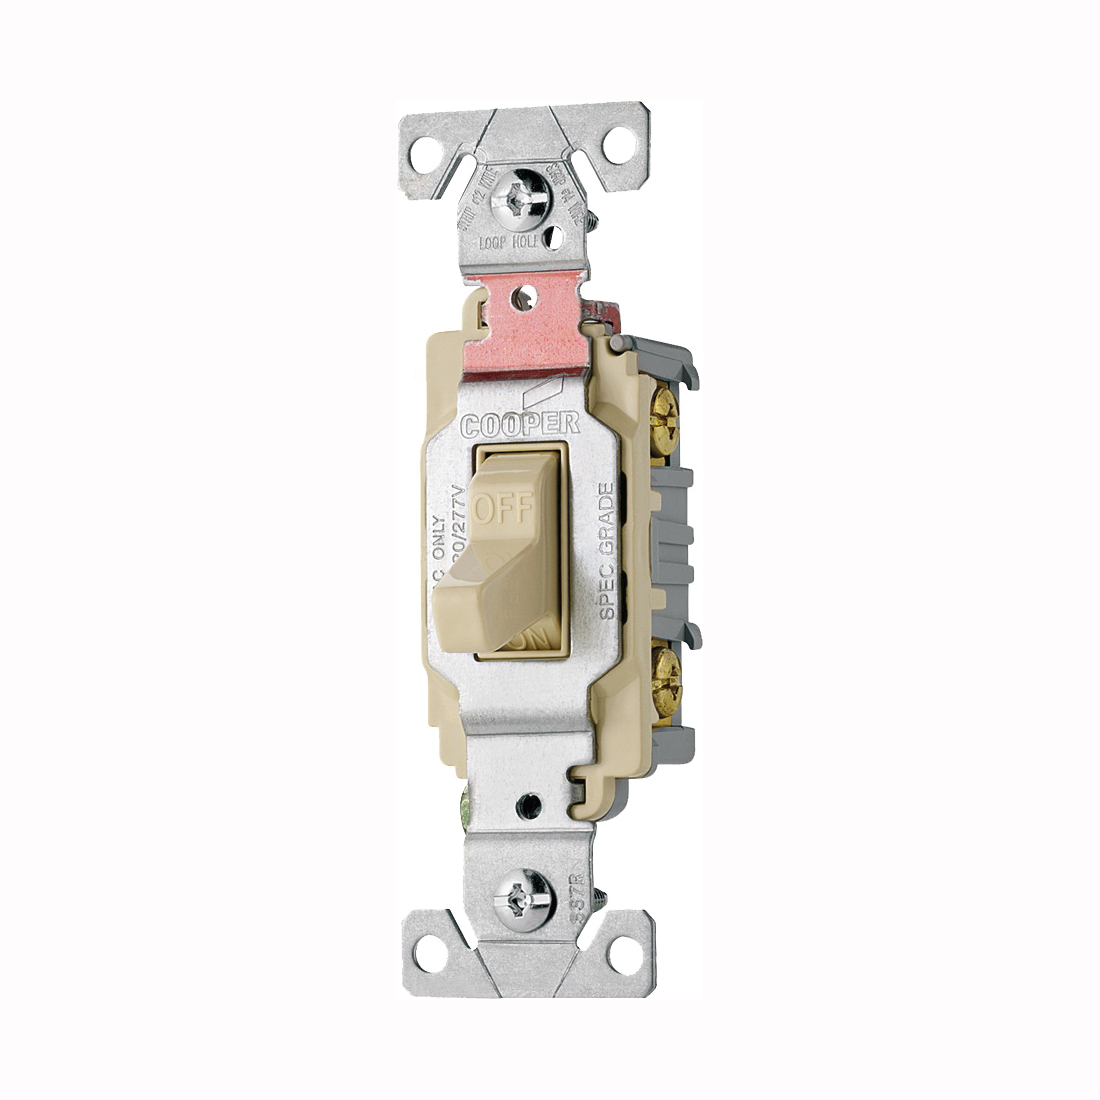 Eaton Wiring Devices CS120V Toggle Switch, 20 A, 120/277 V, Lead Wire Terminal, Nylon Housing Material, Ivory - 1